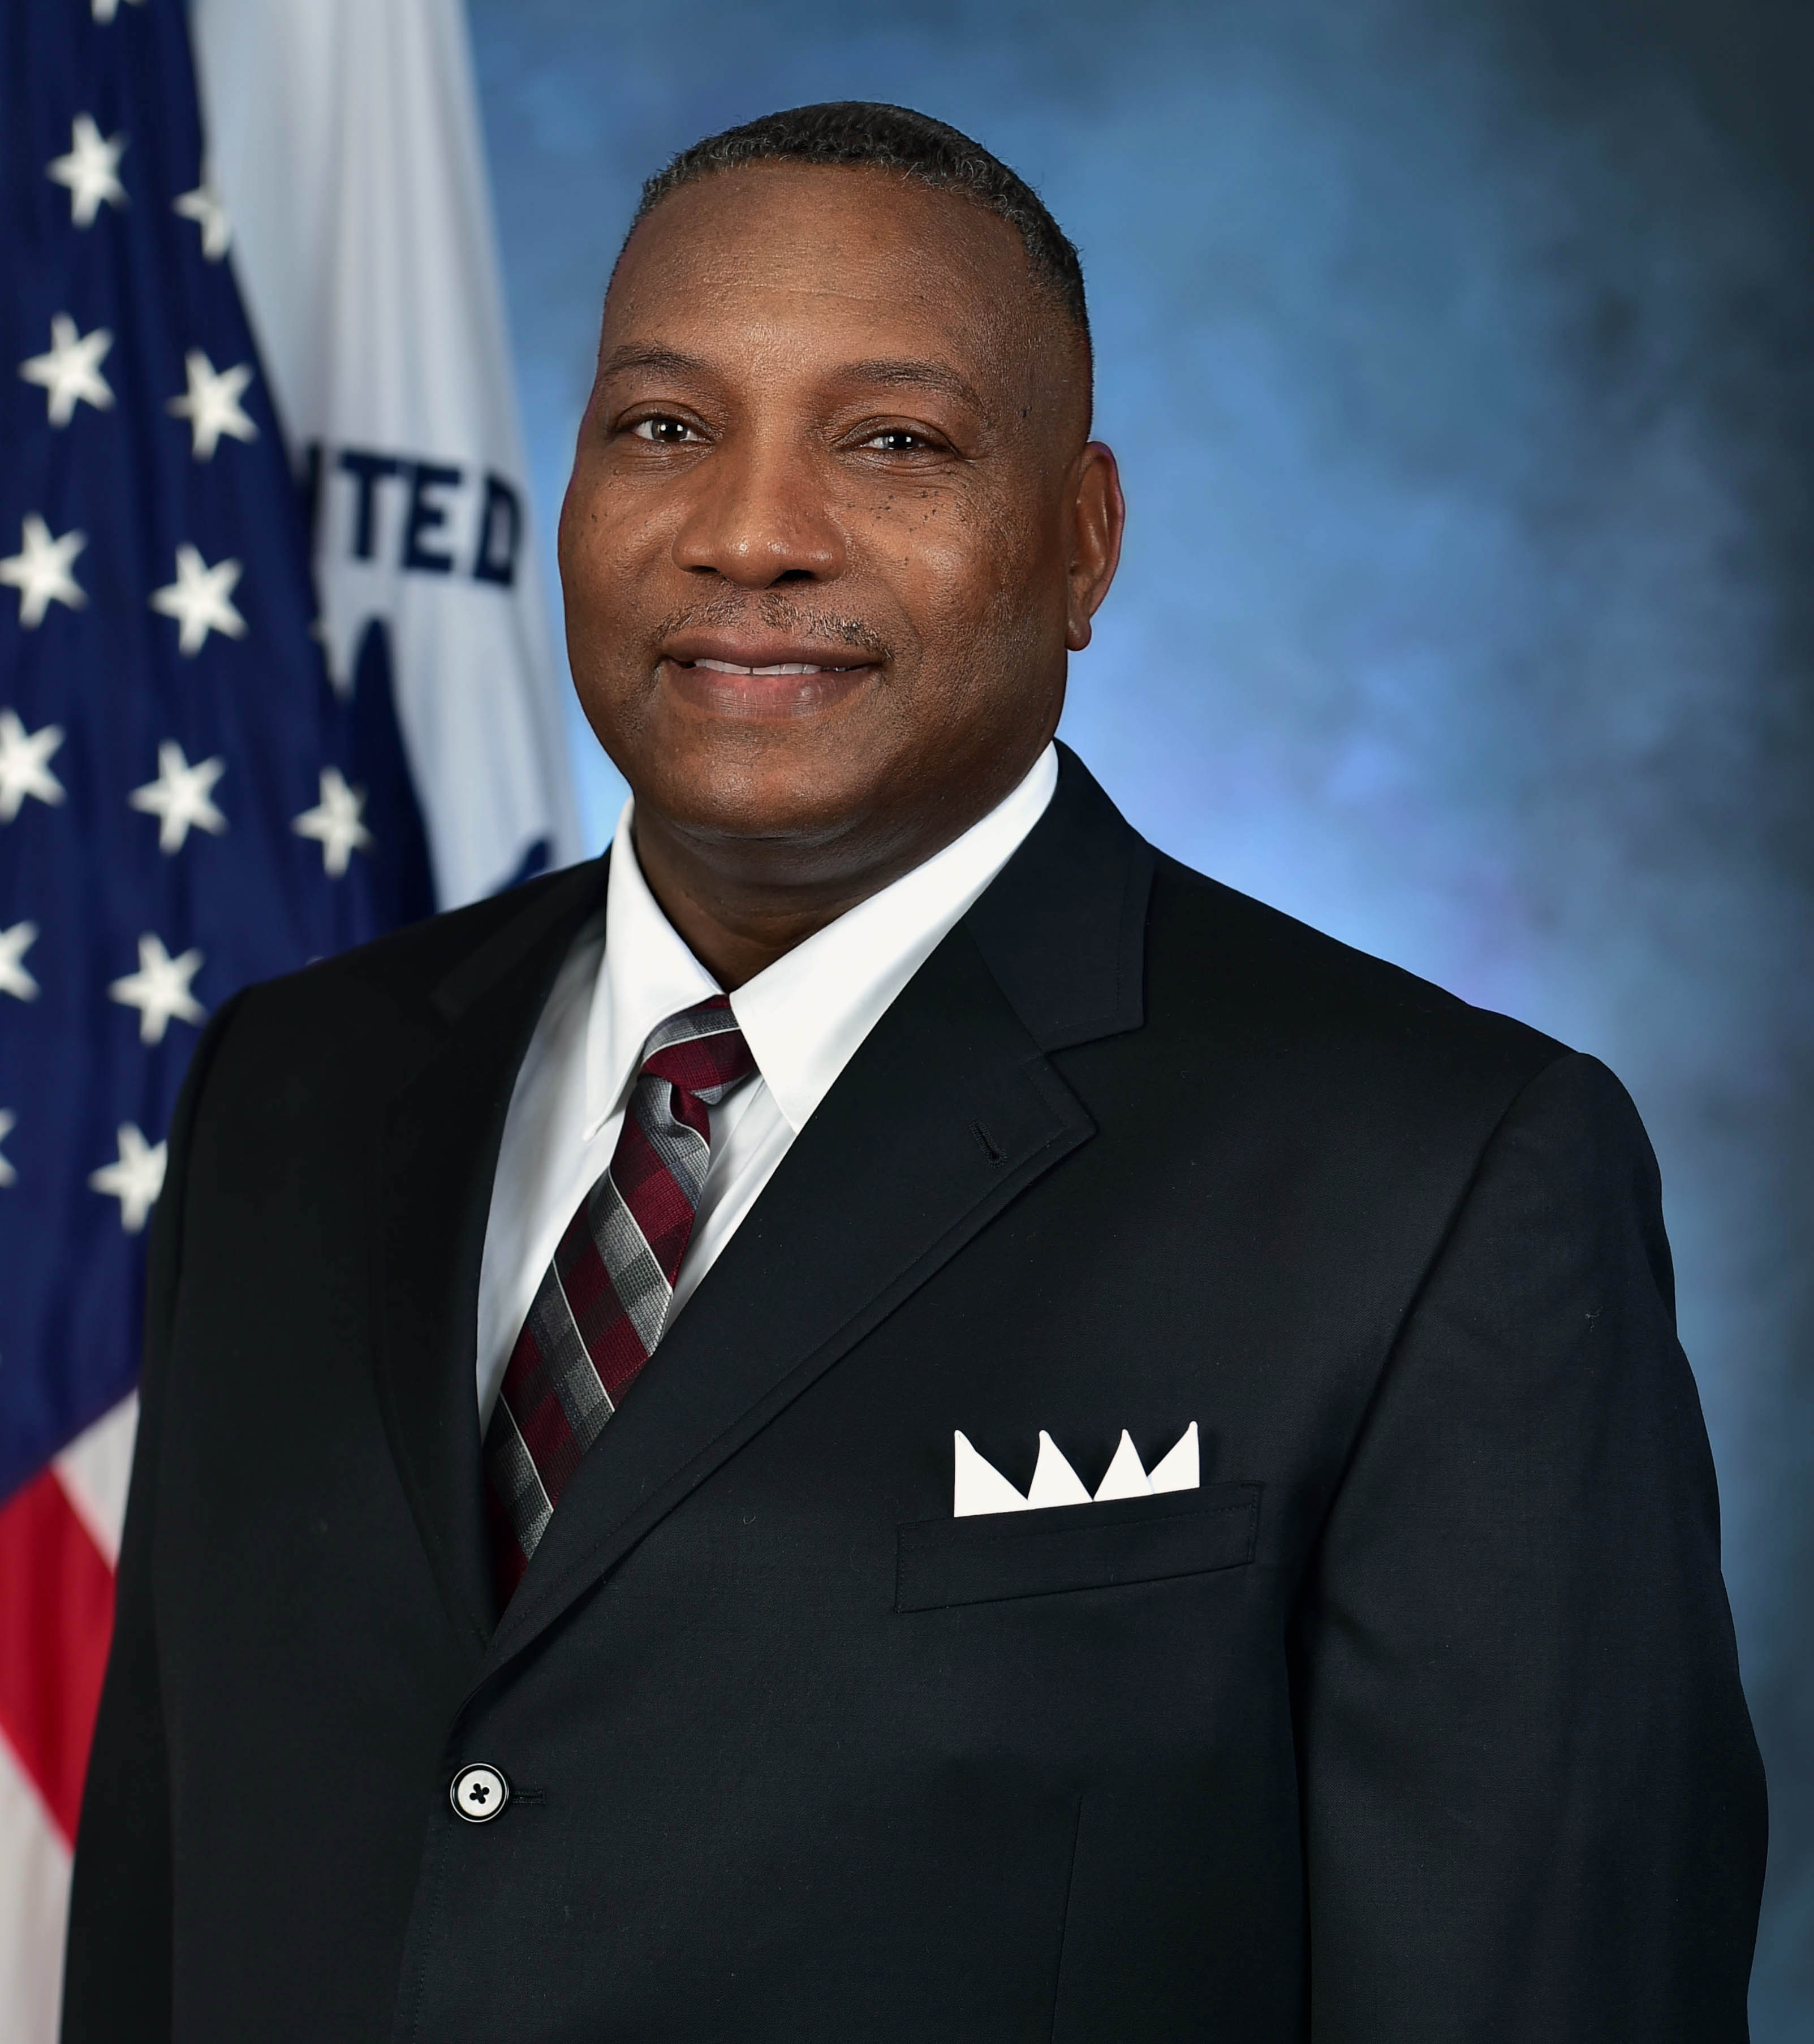 Lee Plowden is the Coast Guard deputy chief of Logistics. He supervises and directs a Coast Guard headquarters staff of 22 personnel and is responsible for developing and promulgating policy and procedures, managing logistics programs, and overseeing information technology systems for Coast Guard logistics activities to provide effective and efficient support to logistics and service centers and field operational units. He also oversees a field workforce of 27 personnel at the Uniform Distribution Center in locations in Cape May and Woodbine, New Jersey. Additionally, he serves as the facilitator for effective working relationships and partnerships with headquarters, Department of Homeland Security (DHS), Department of Defense (DoD), Defense Logistics Agency, other military services, federal agencies, and Coast Guard organizations to enhance logistics and mission support. He is the primary Coast Guard headquarters coordinator for Sector Logistics Departments and the Director of Operational Logistics (DOL). Plowden has been with the Coast Guard for six years. Prior to joining the Coast Guard in 2015, he served as the DoD Director for Troop Support and Energy Programs, overseeing policy and activities for a $70 billion enterprise.